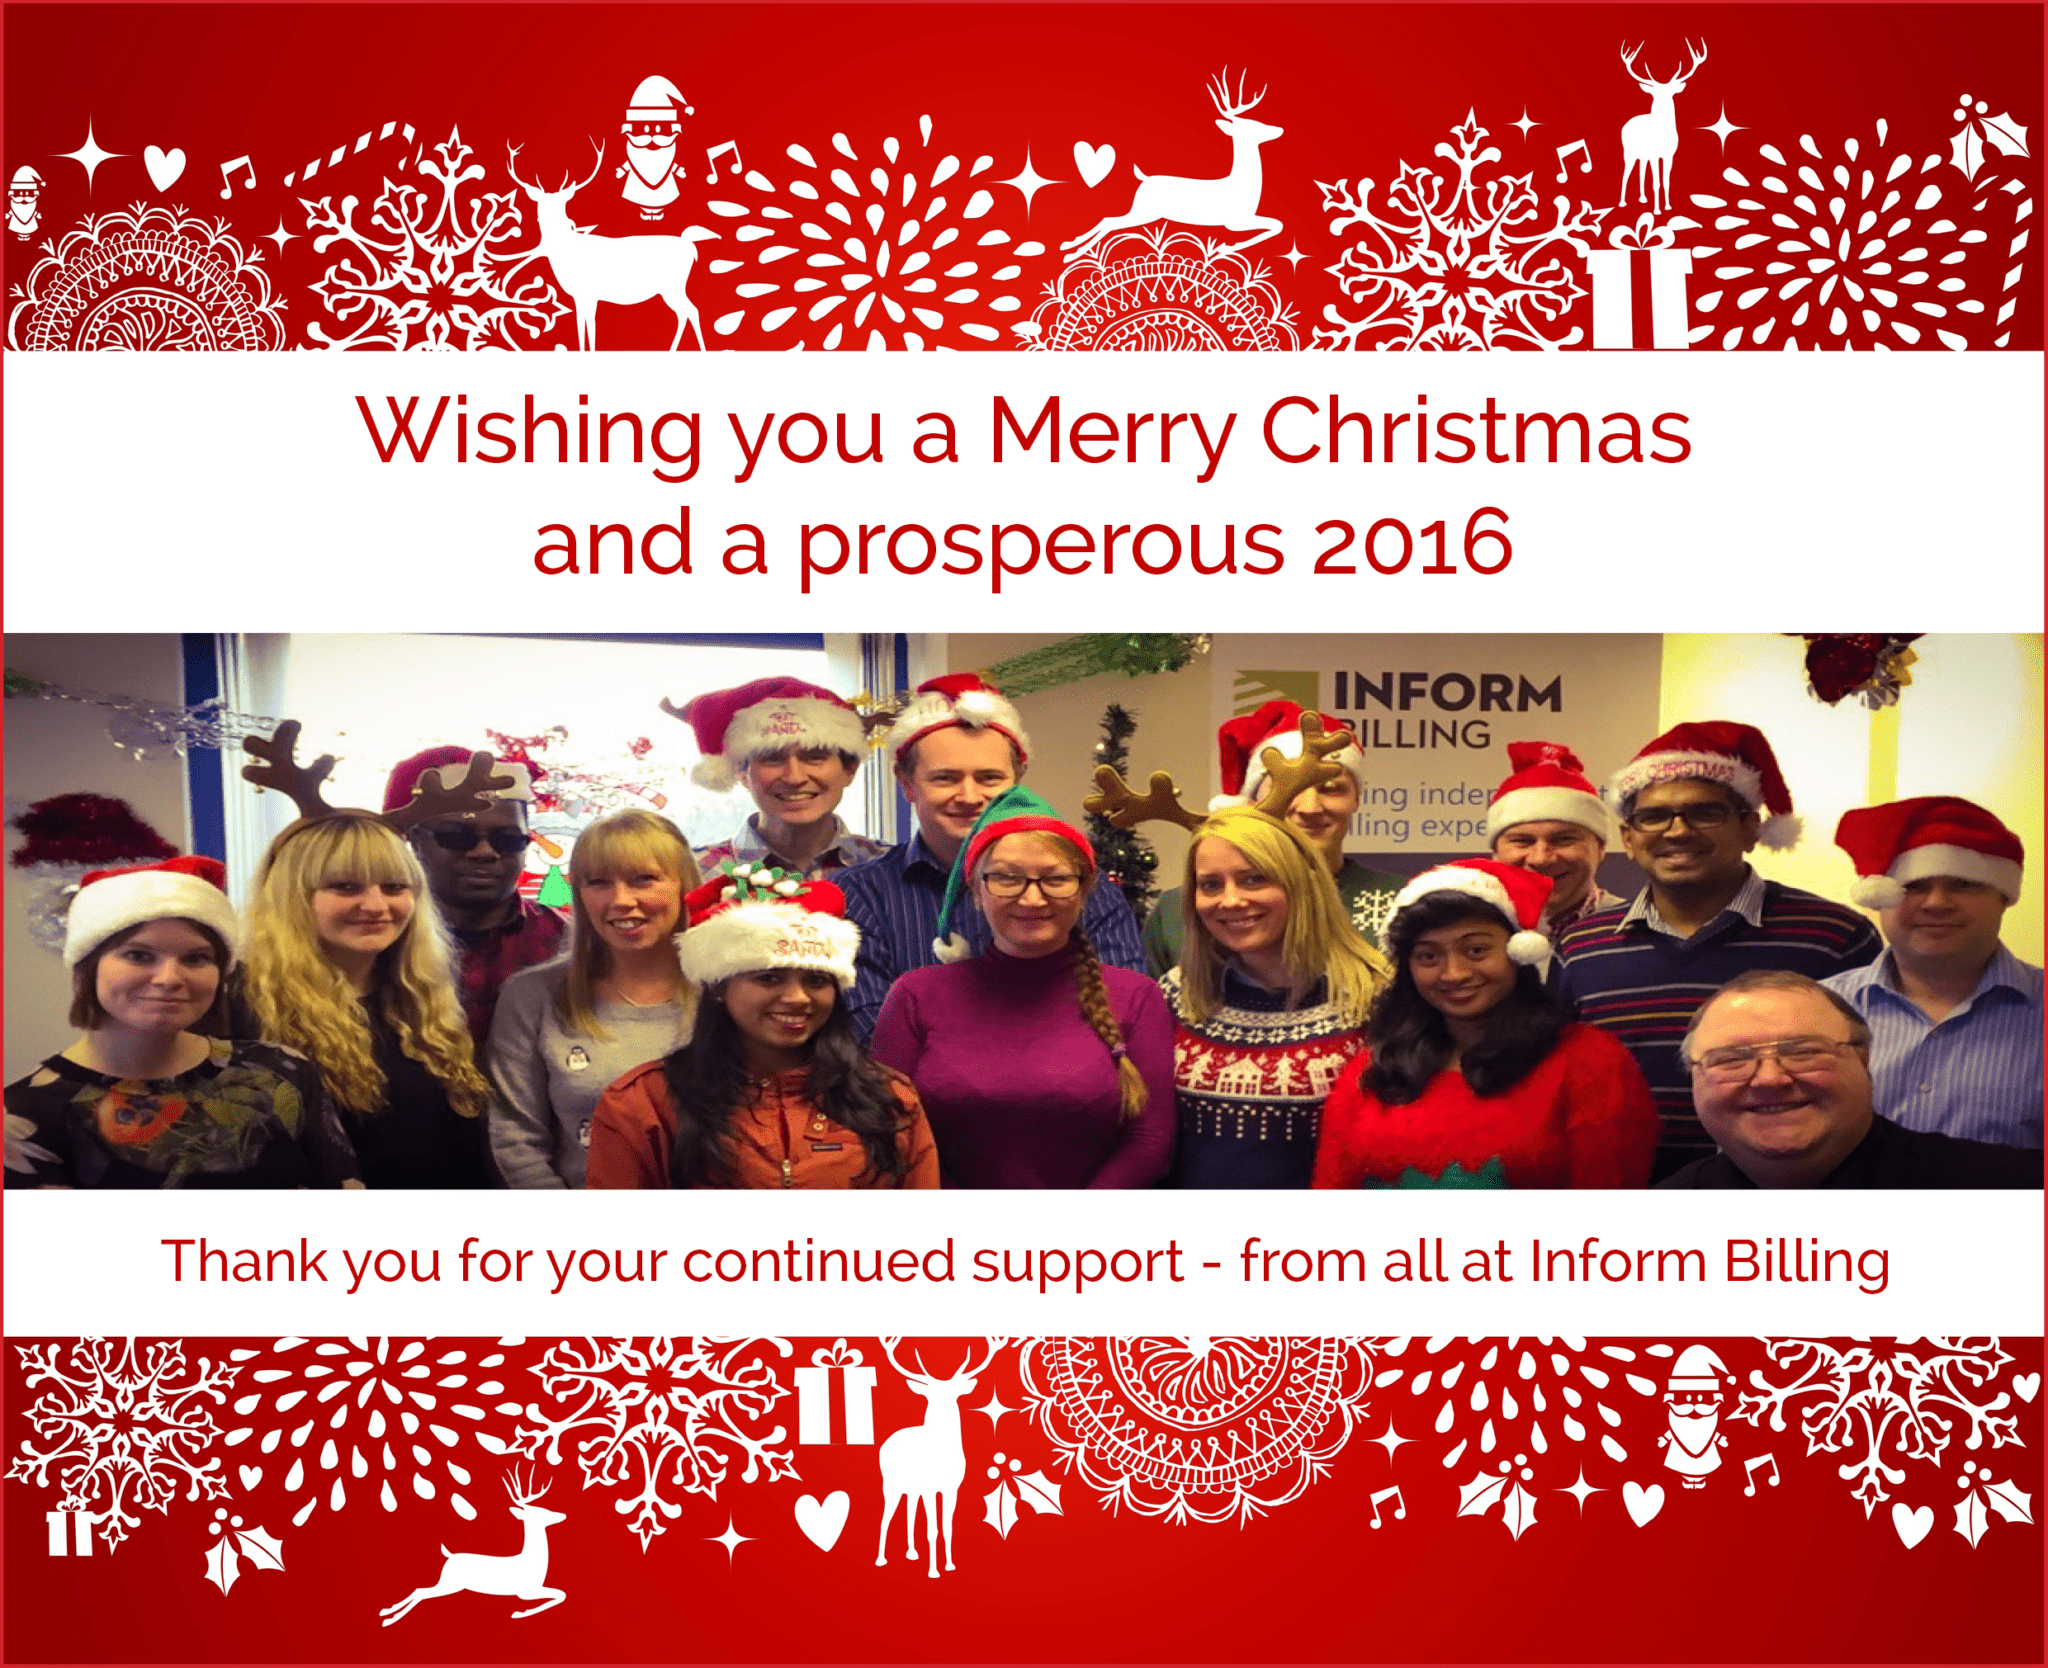 Merry Christmas from all at Inform Billing